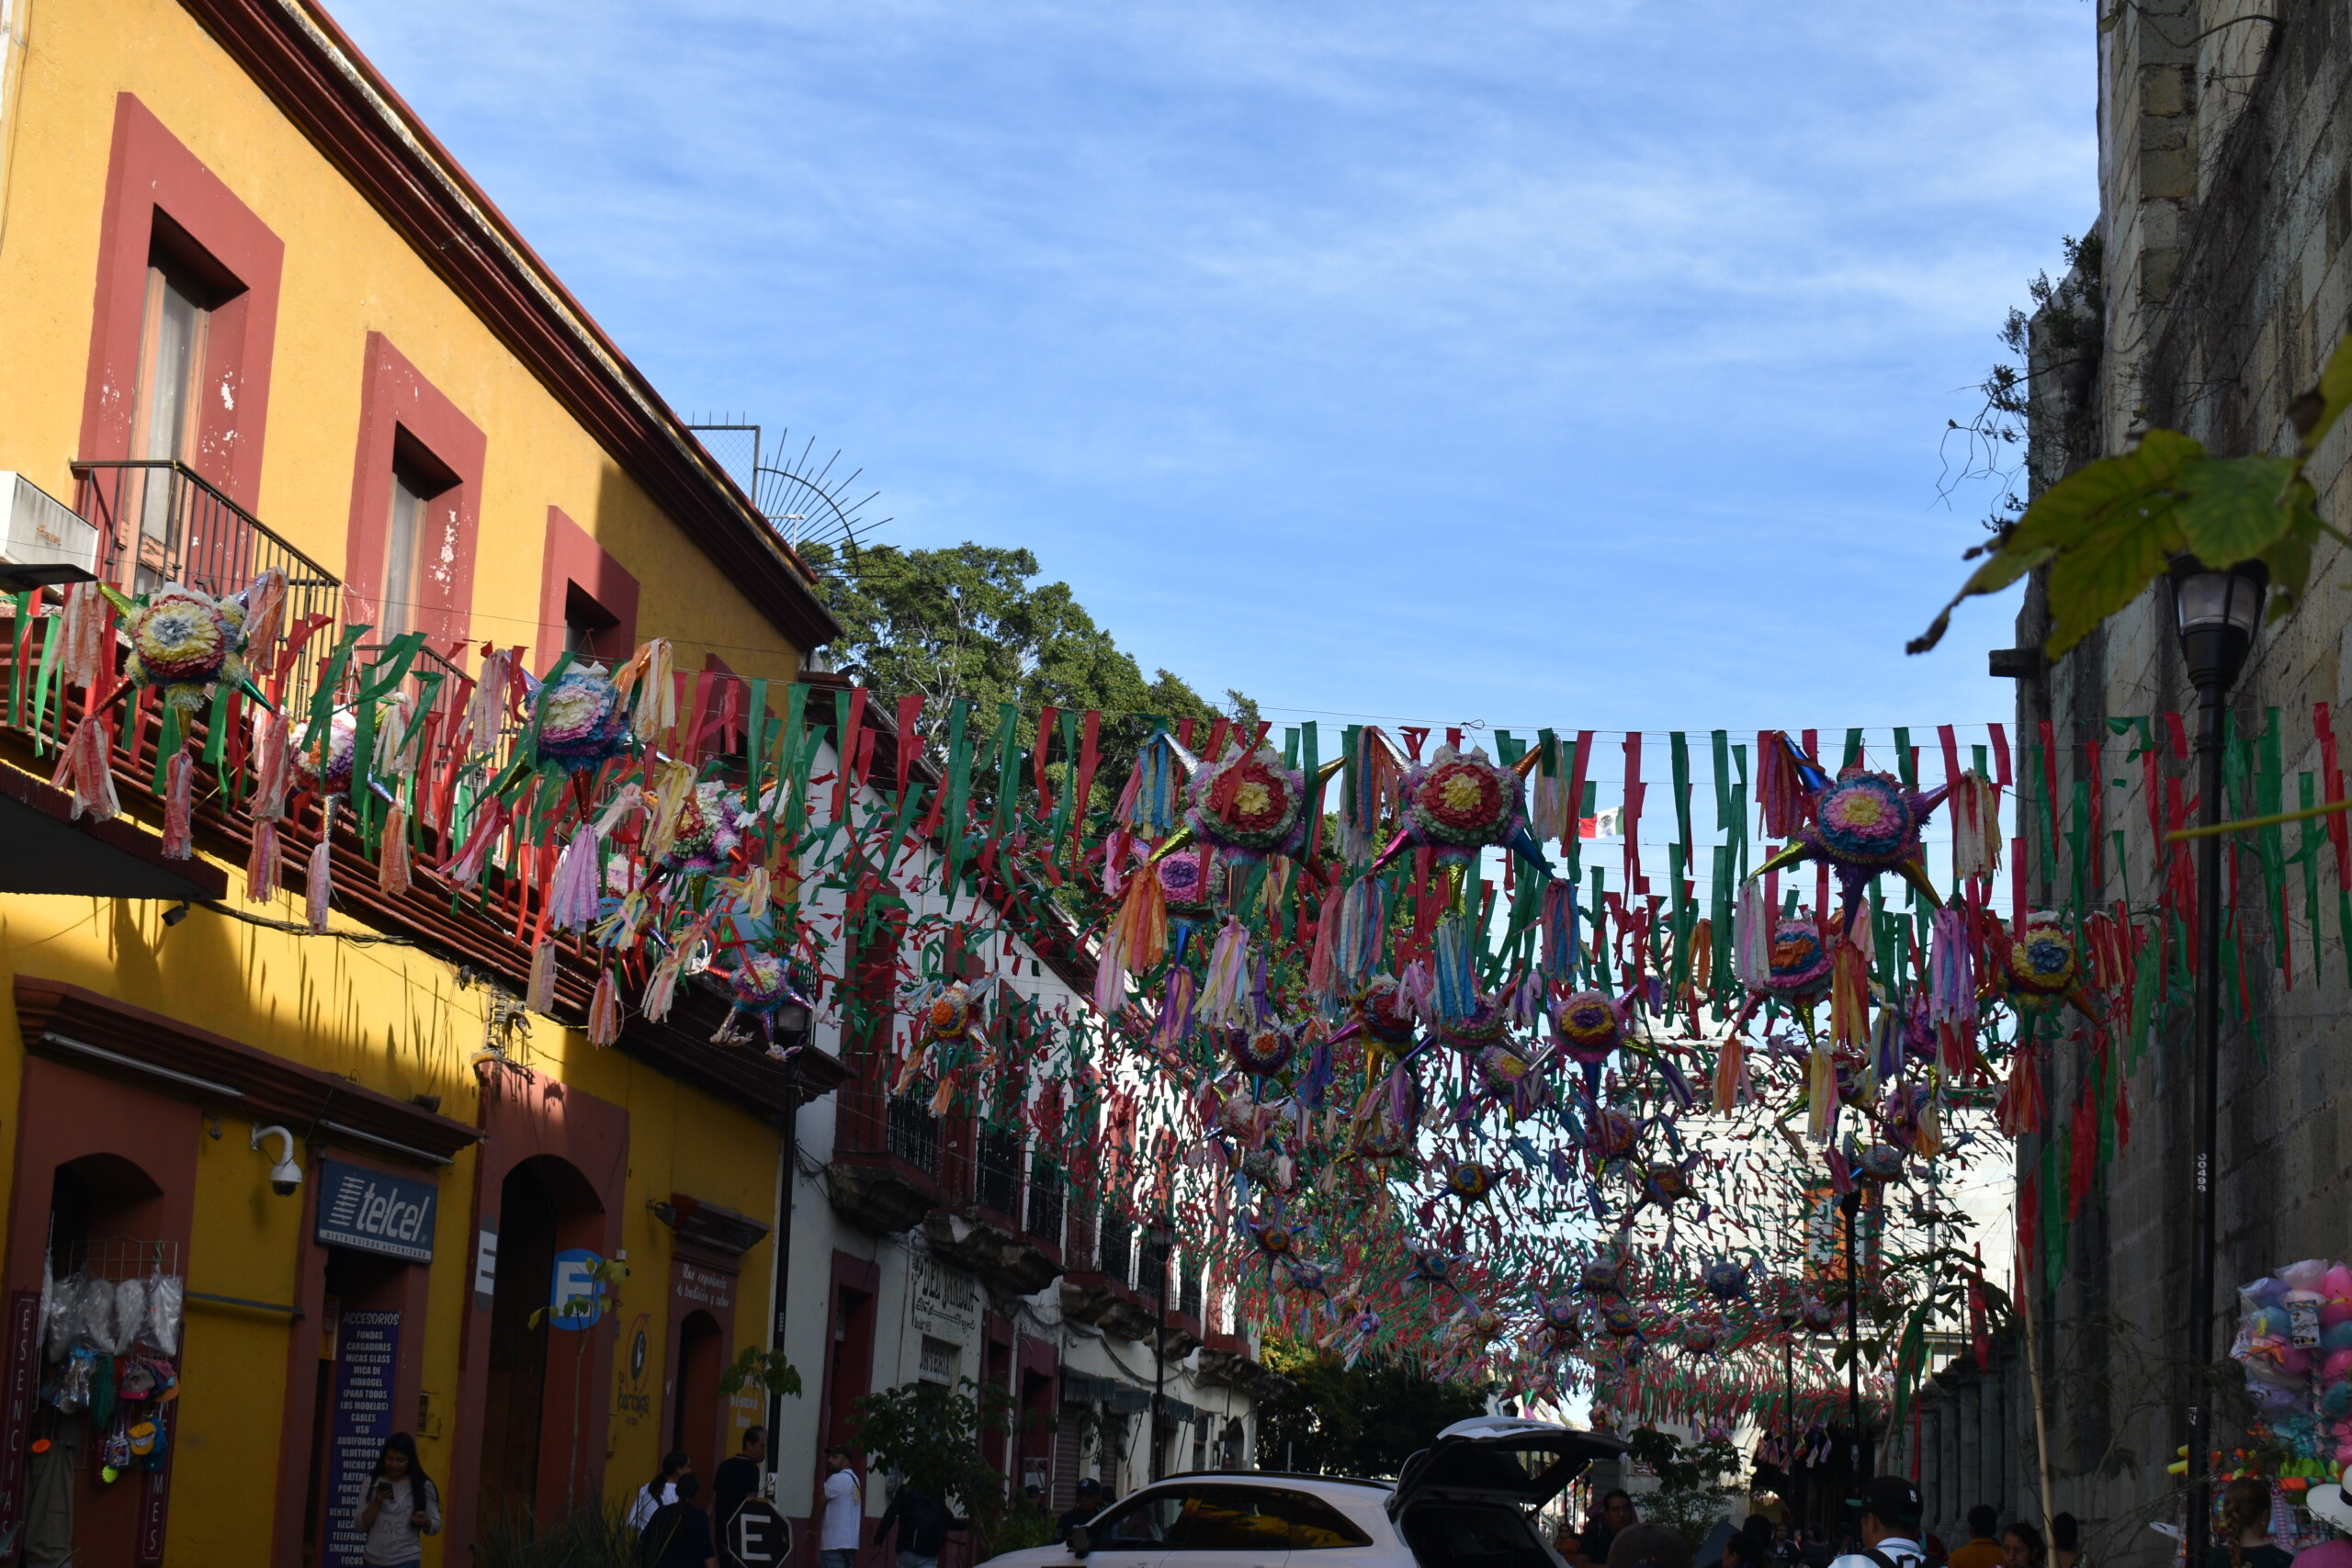 Piñatas and flags hang across buildings and the streets in Oaxaca, Mexico.